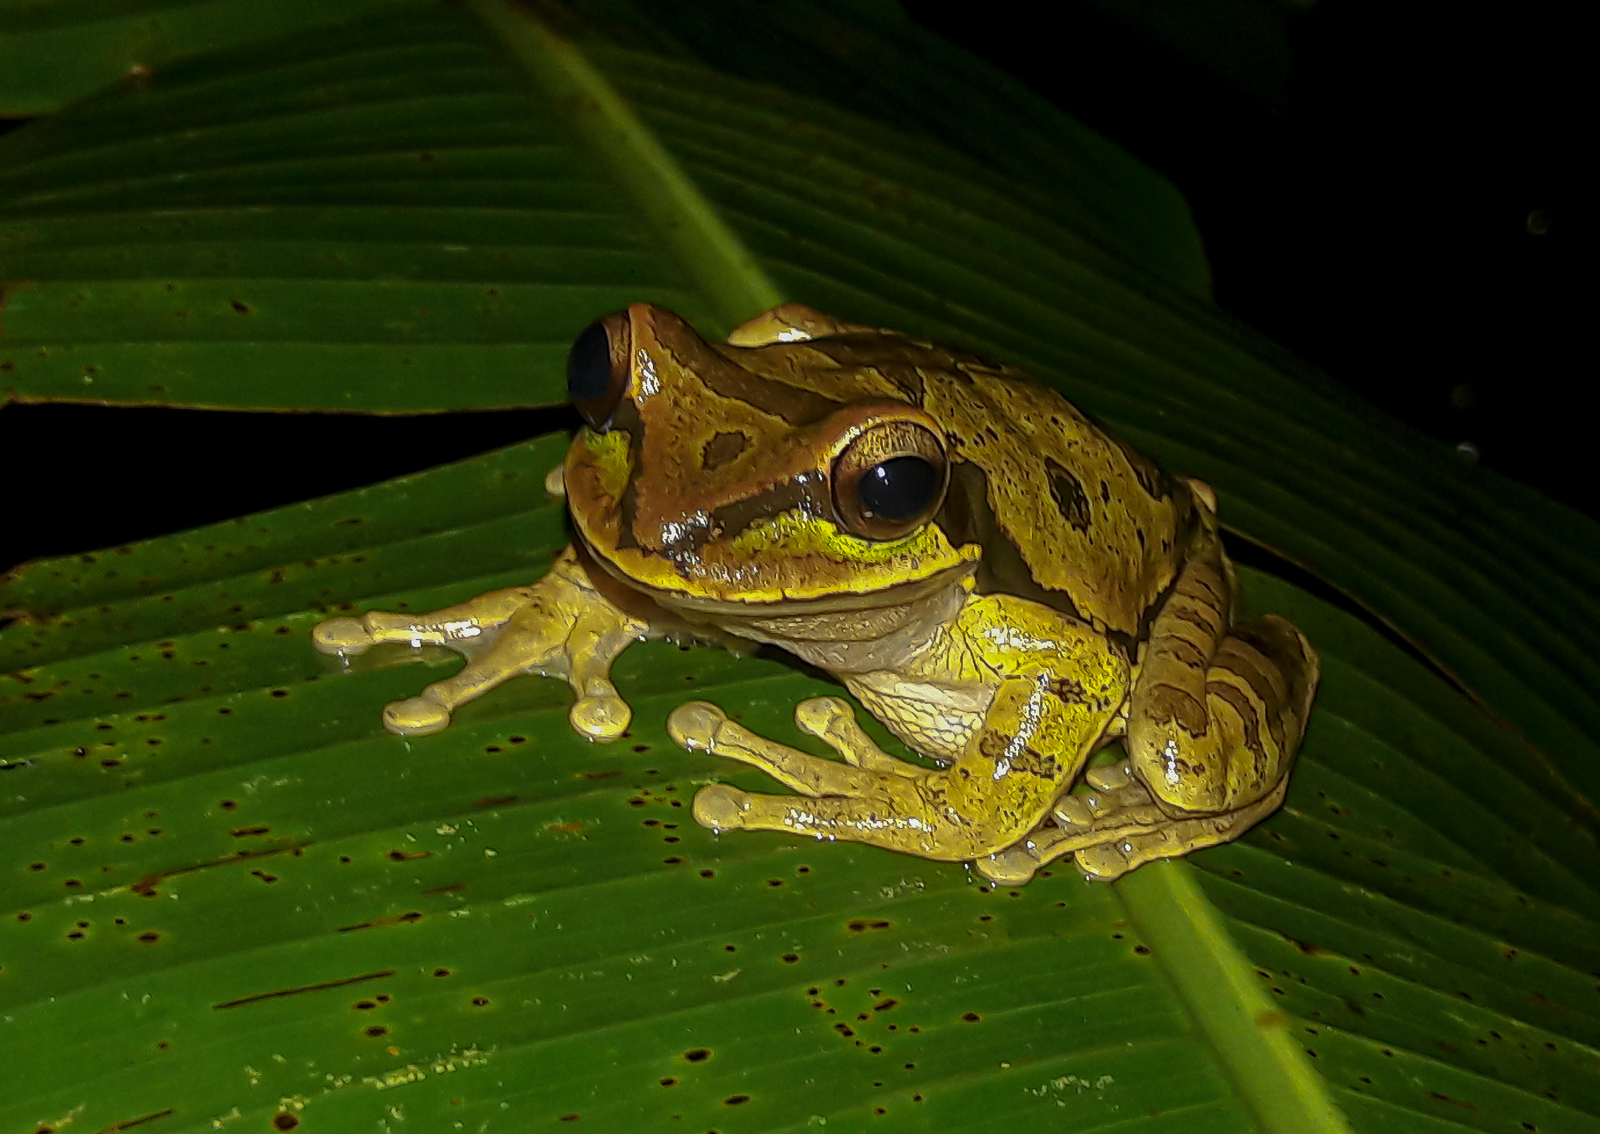 Frogs, Bats, Snakes,Mammals and Night Birds are filling the Corcovado Forest night with their calls and offer for the Photographer great possibilities of Macro Shots